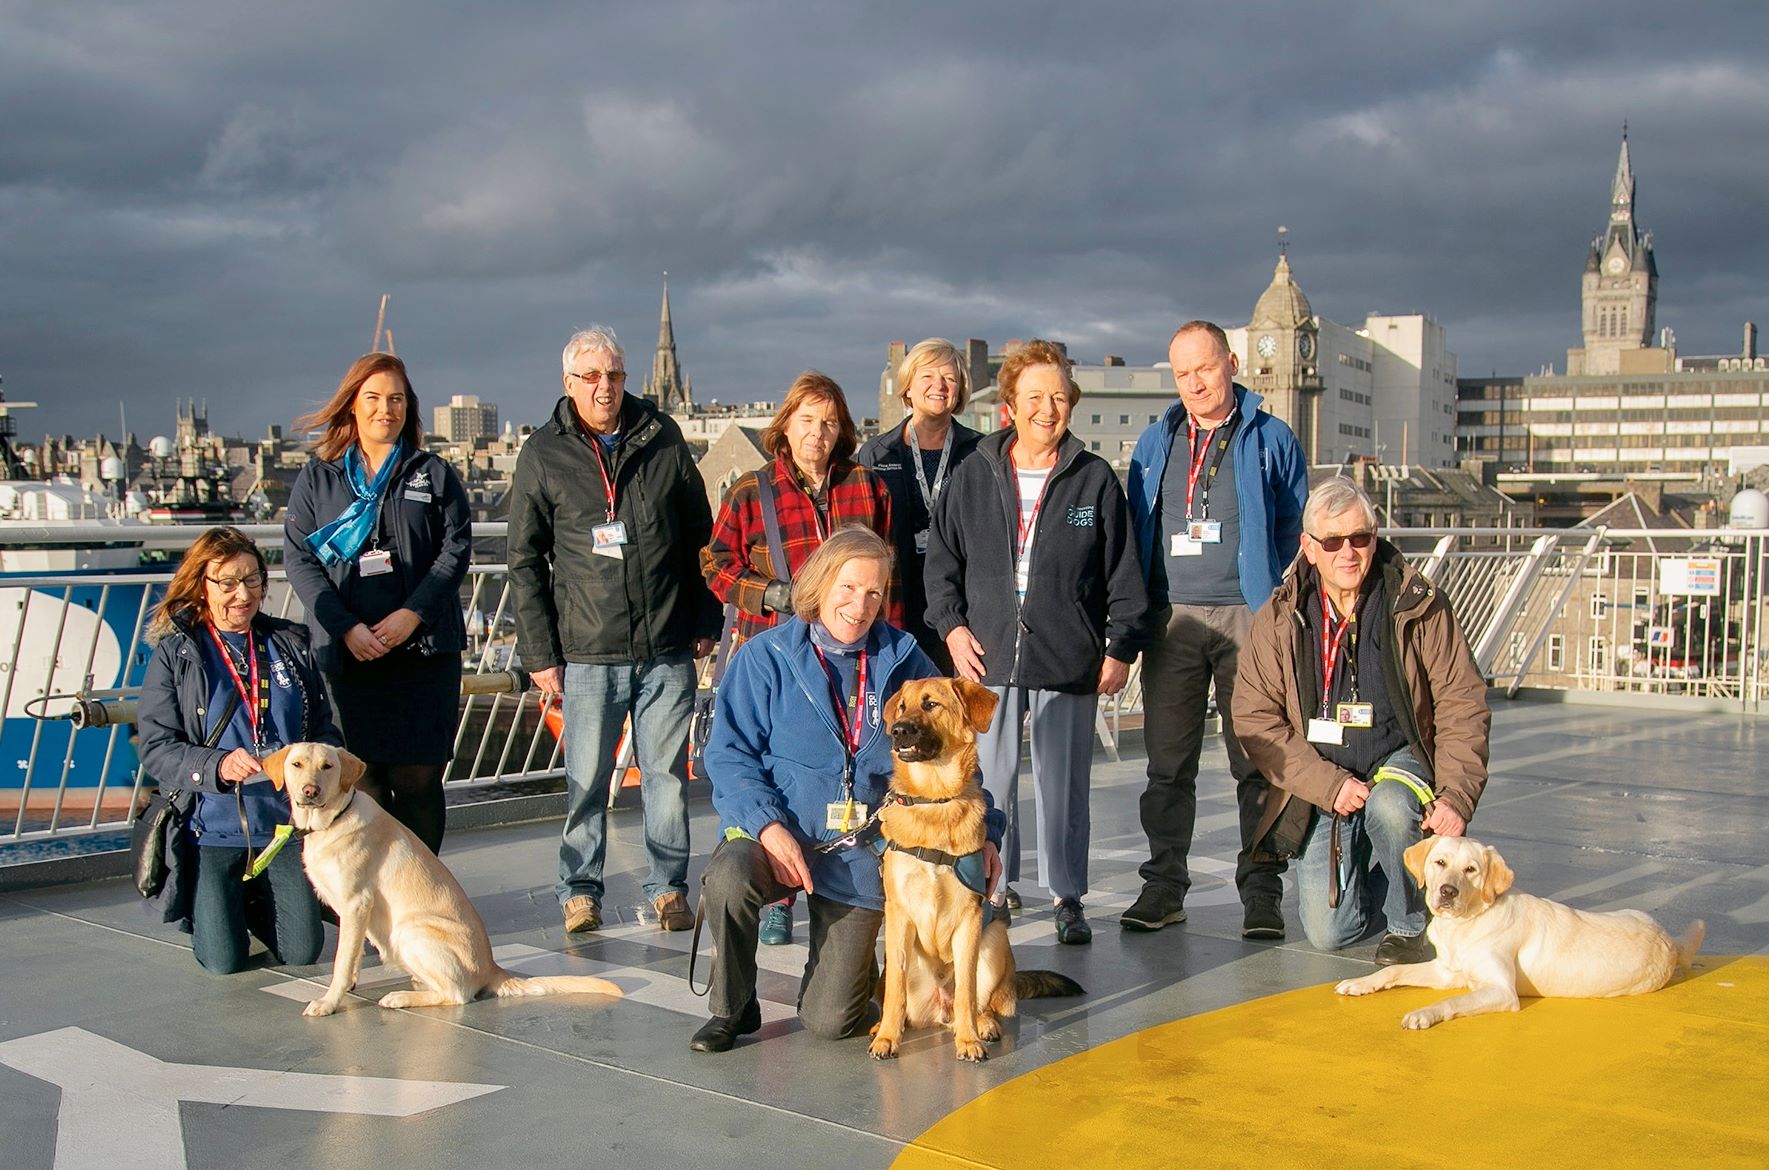 A group photo showing volunteers and their pups, staff from NorthLink Ferries and Puppy Training Supervisor Dave Mackay. 
Pups from left to right are Babs (yellow lab retriever cross aged 10 months), Storm (golden retriever cross German shepherd aged 9 months) and Faye (yellow lab retriever cross aged 10 months).